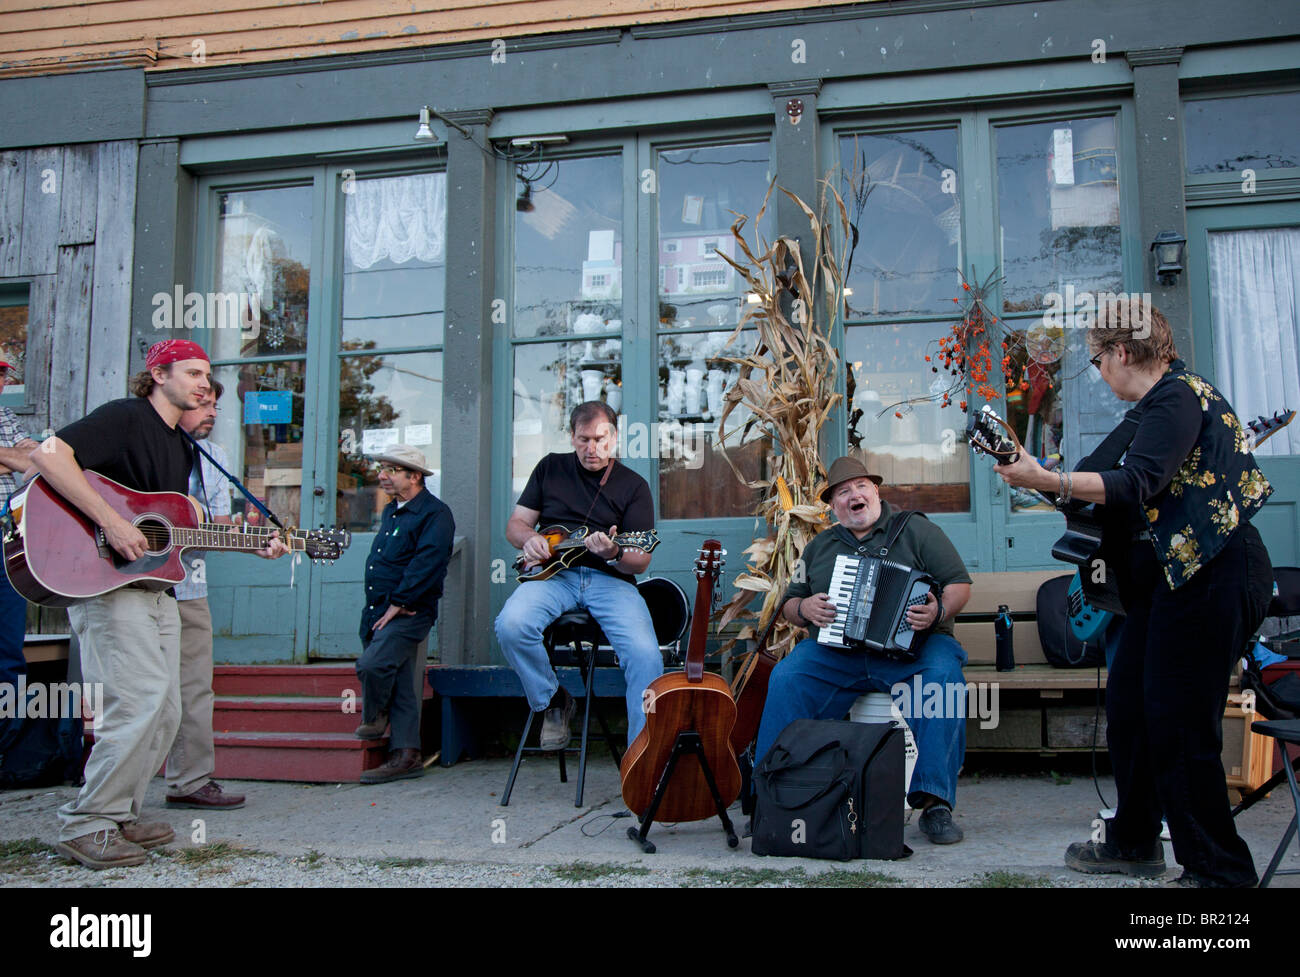 Metamora, Indiana - A bluegrass band plays on the street during the Old Time Music Festival in Metamora, Indiana. Stock Photo